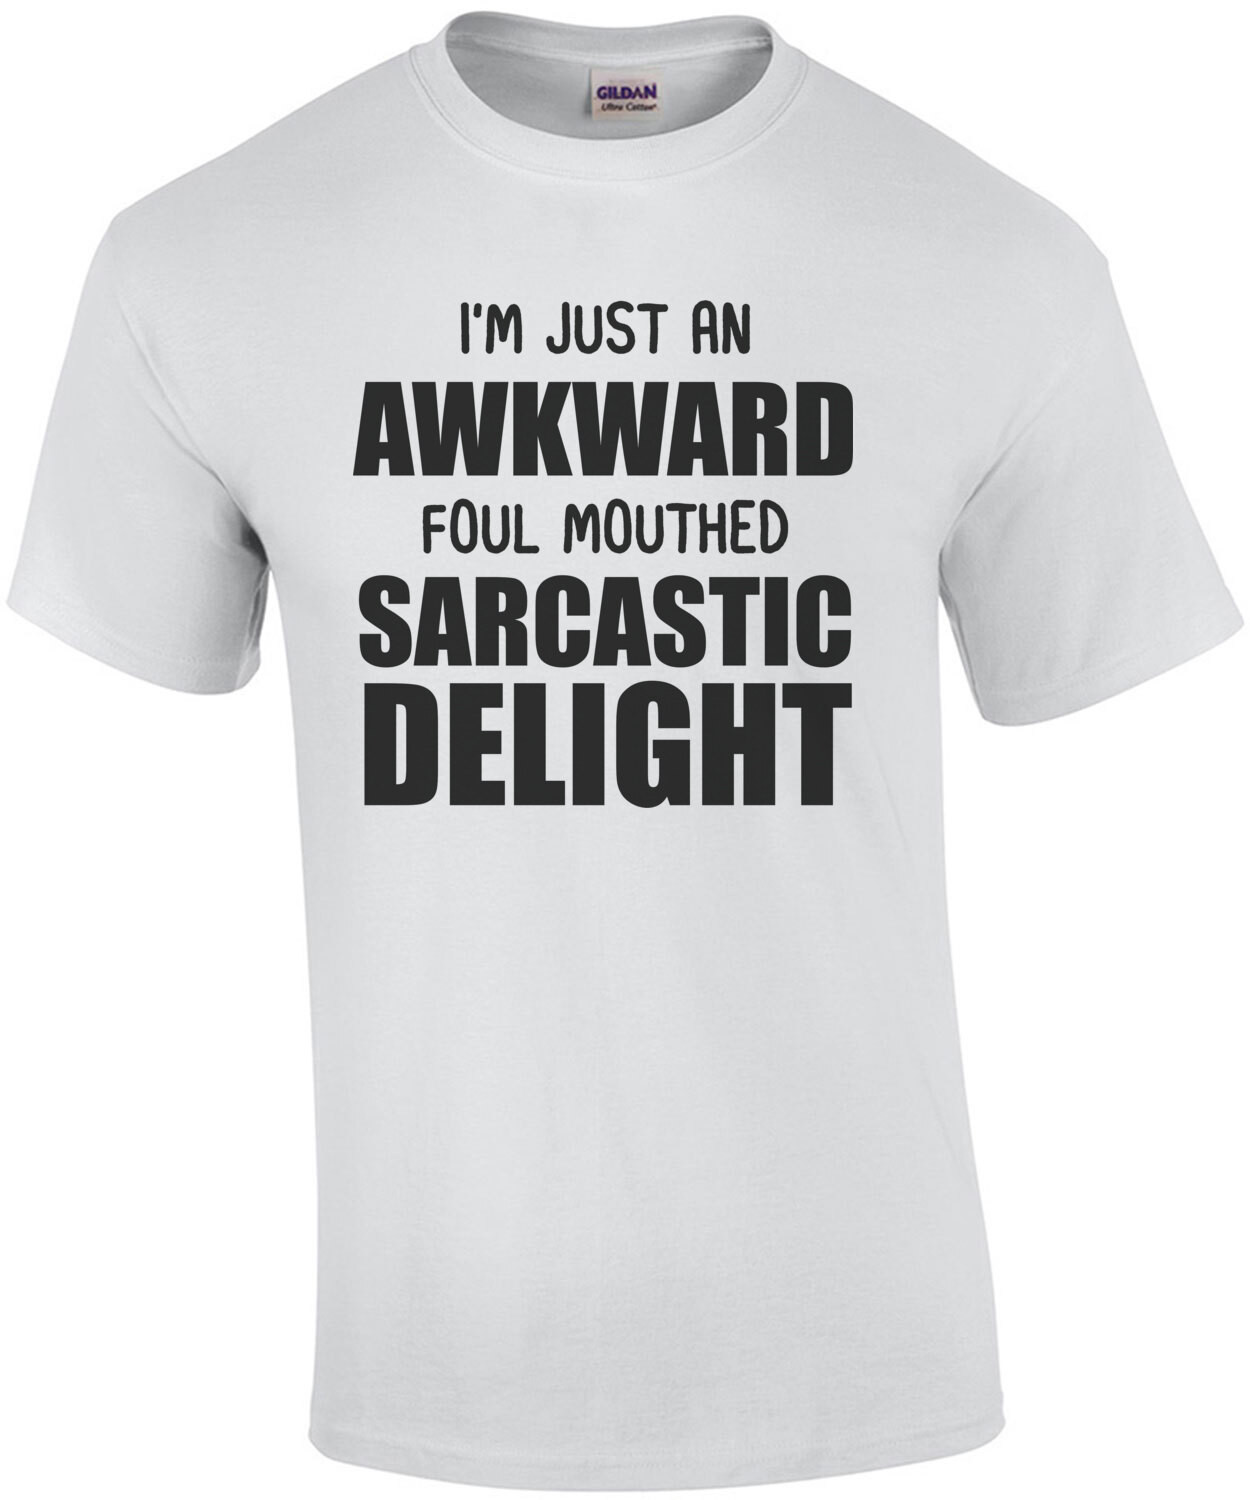 I'm just an awkward foul mouthed sarcastic delight - funny sarcastic t-shirt